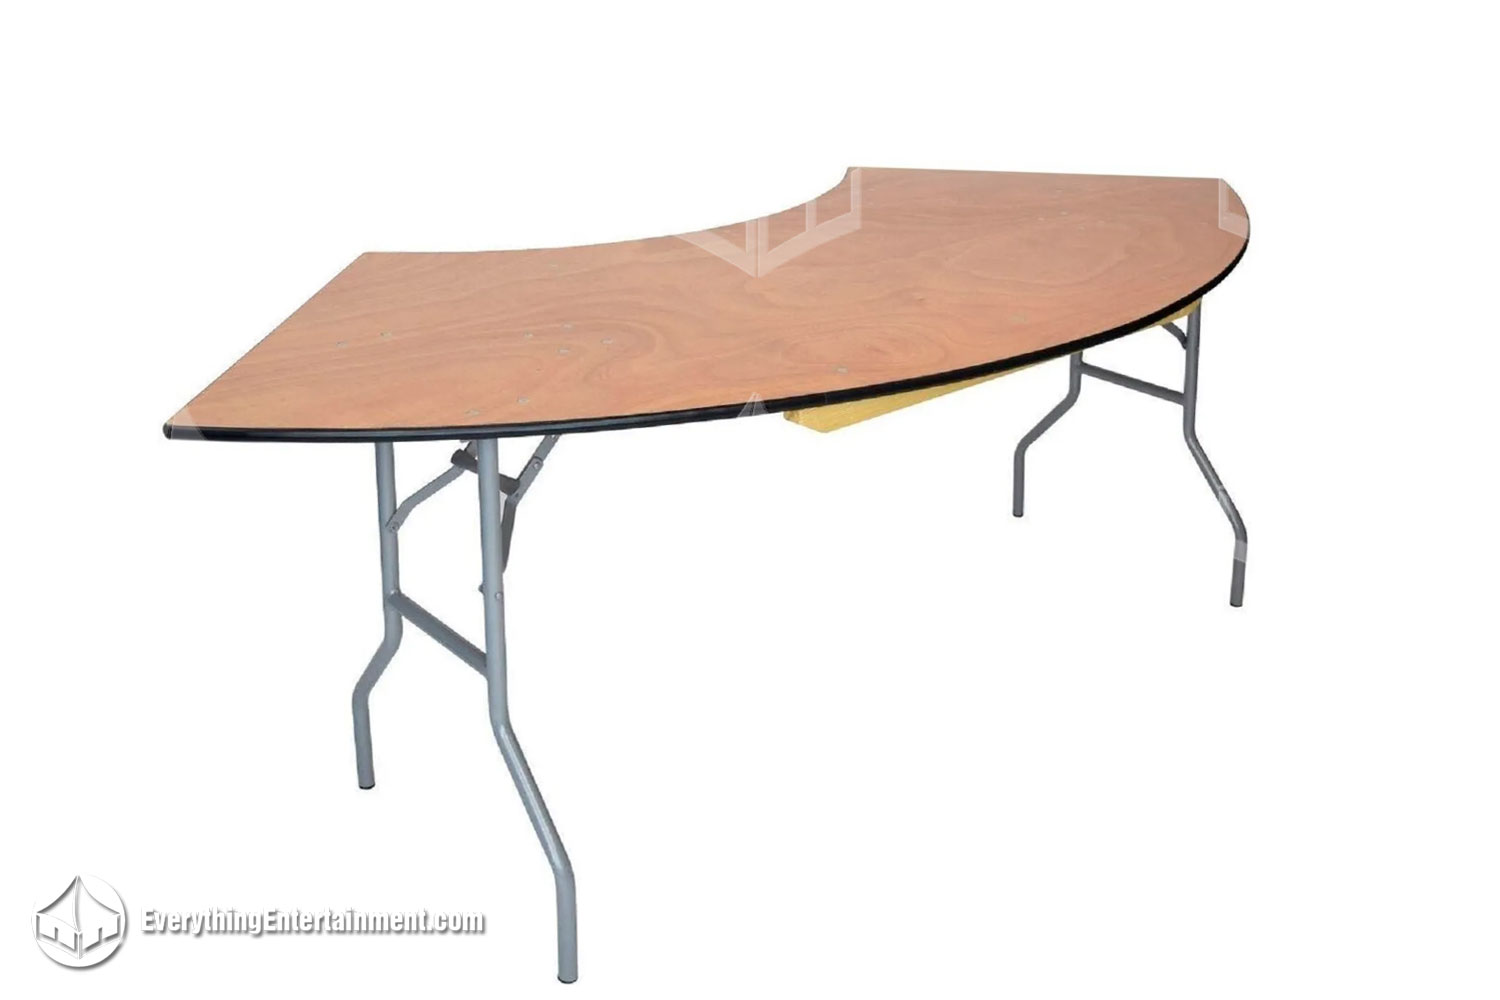 Crescent table on white background